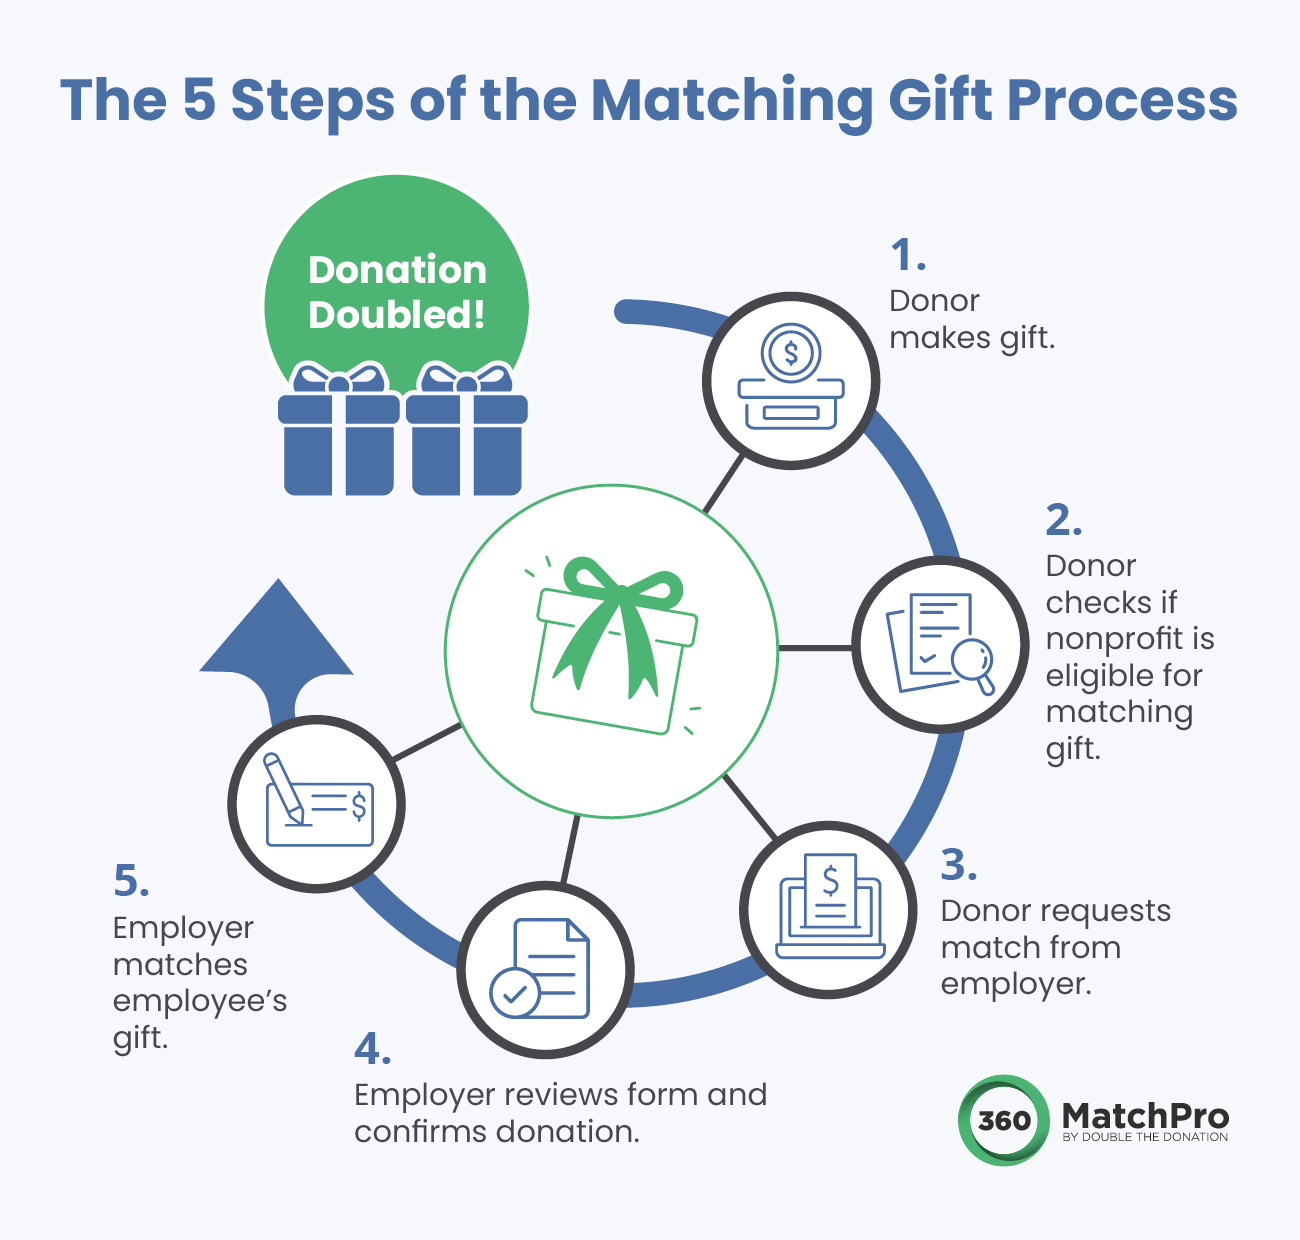 This image outlines how a matching gifts corporate giving program usually works, also detailed in the text below.